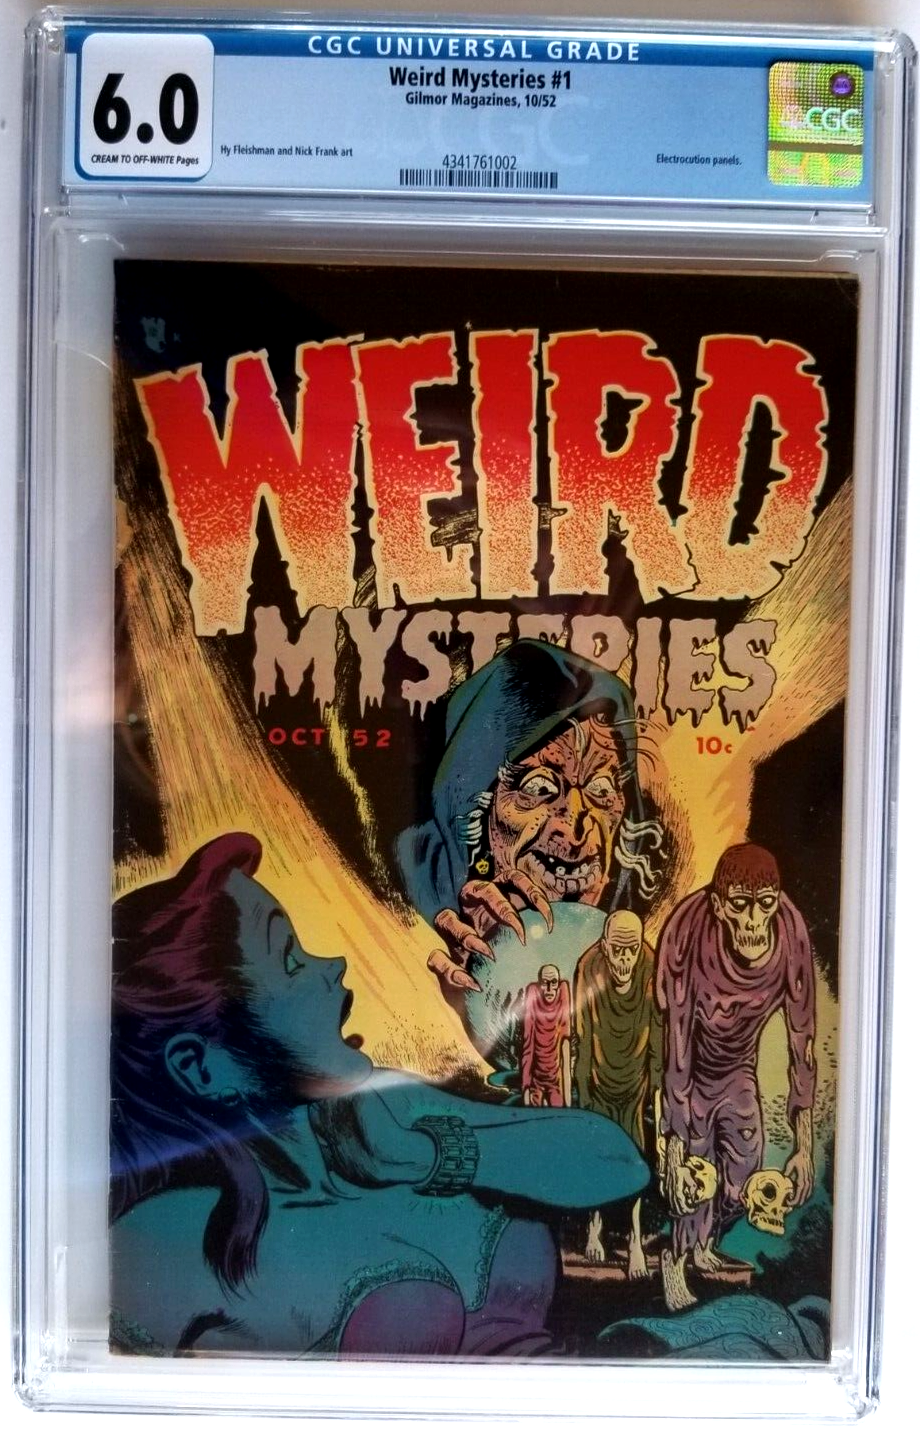 WEIRD MYSTERIES 1 CGC F 60  GILMOR 52 WITCH ZOMBIE SKULL COVER PRECODE HORROR